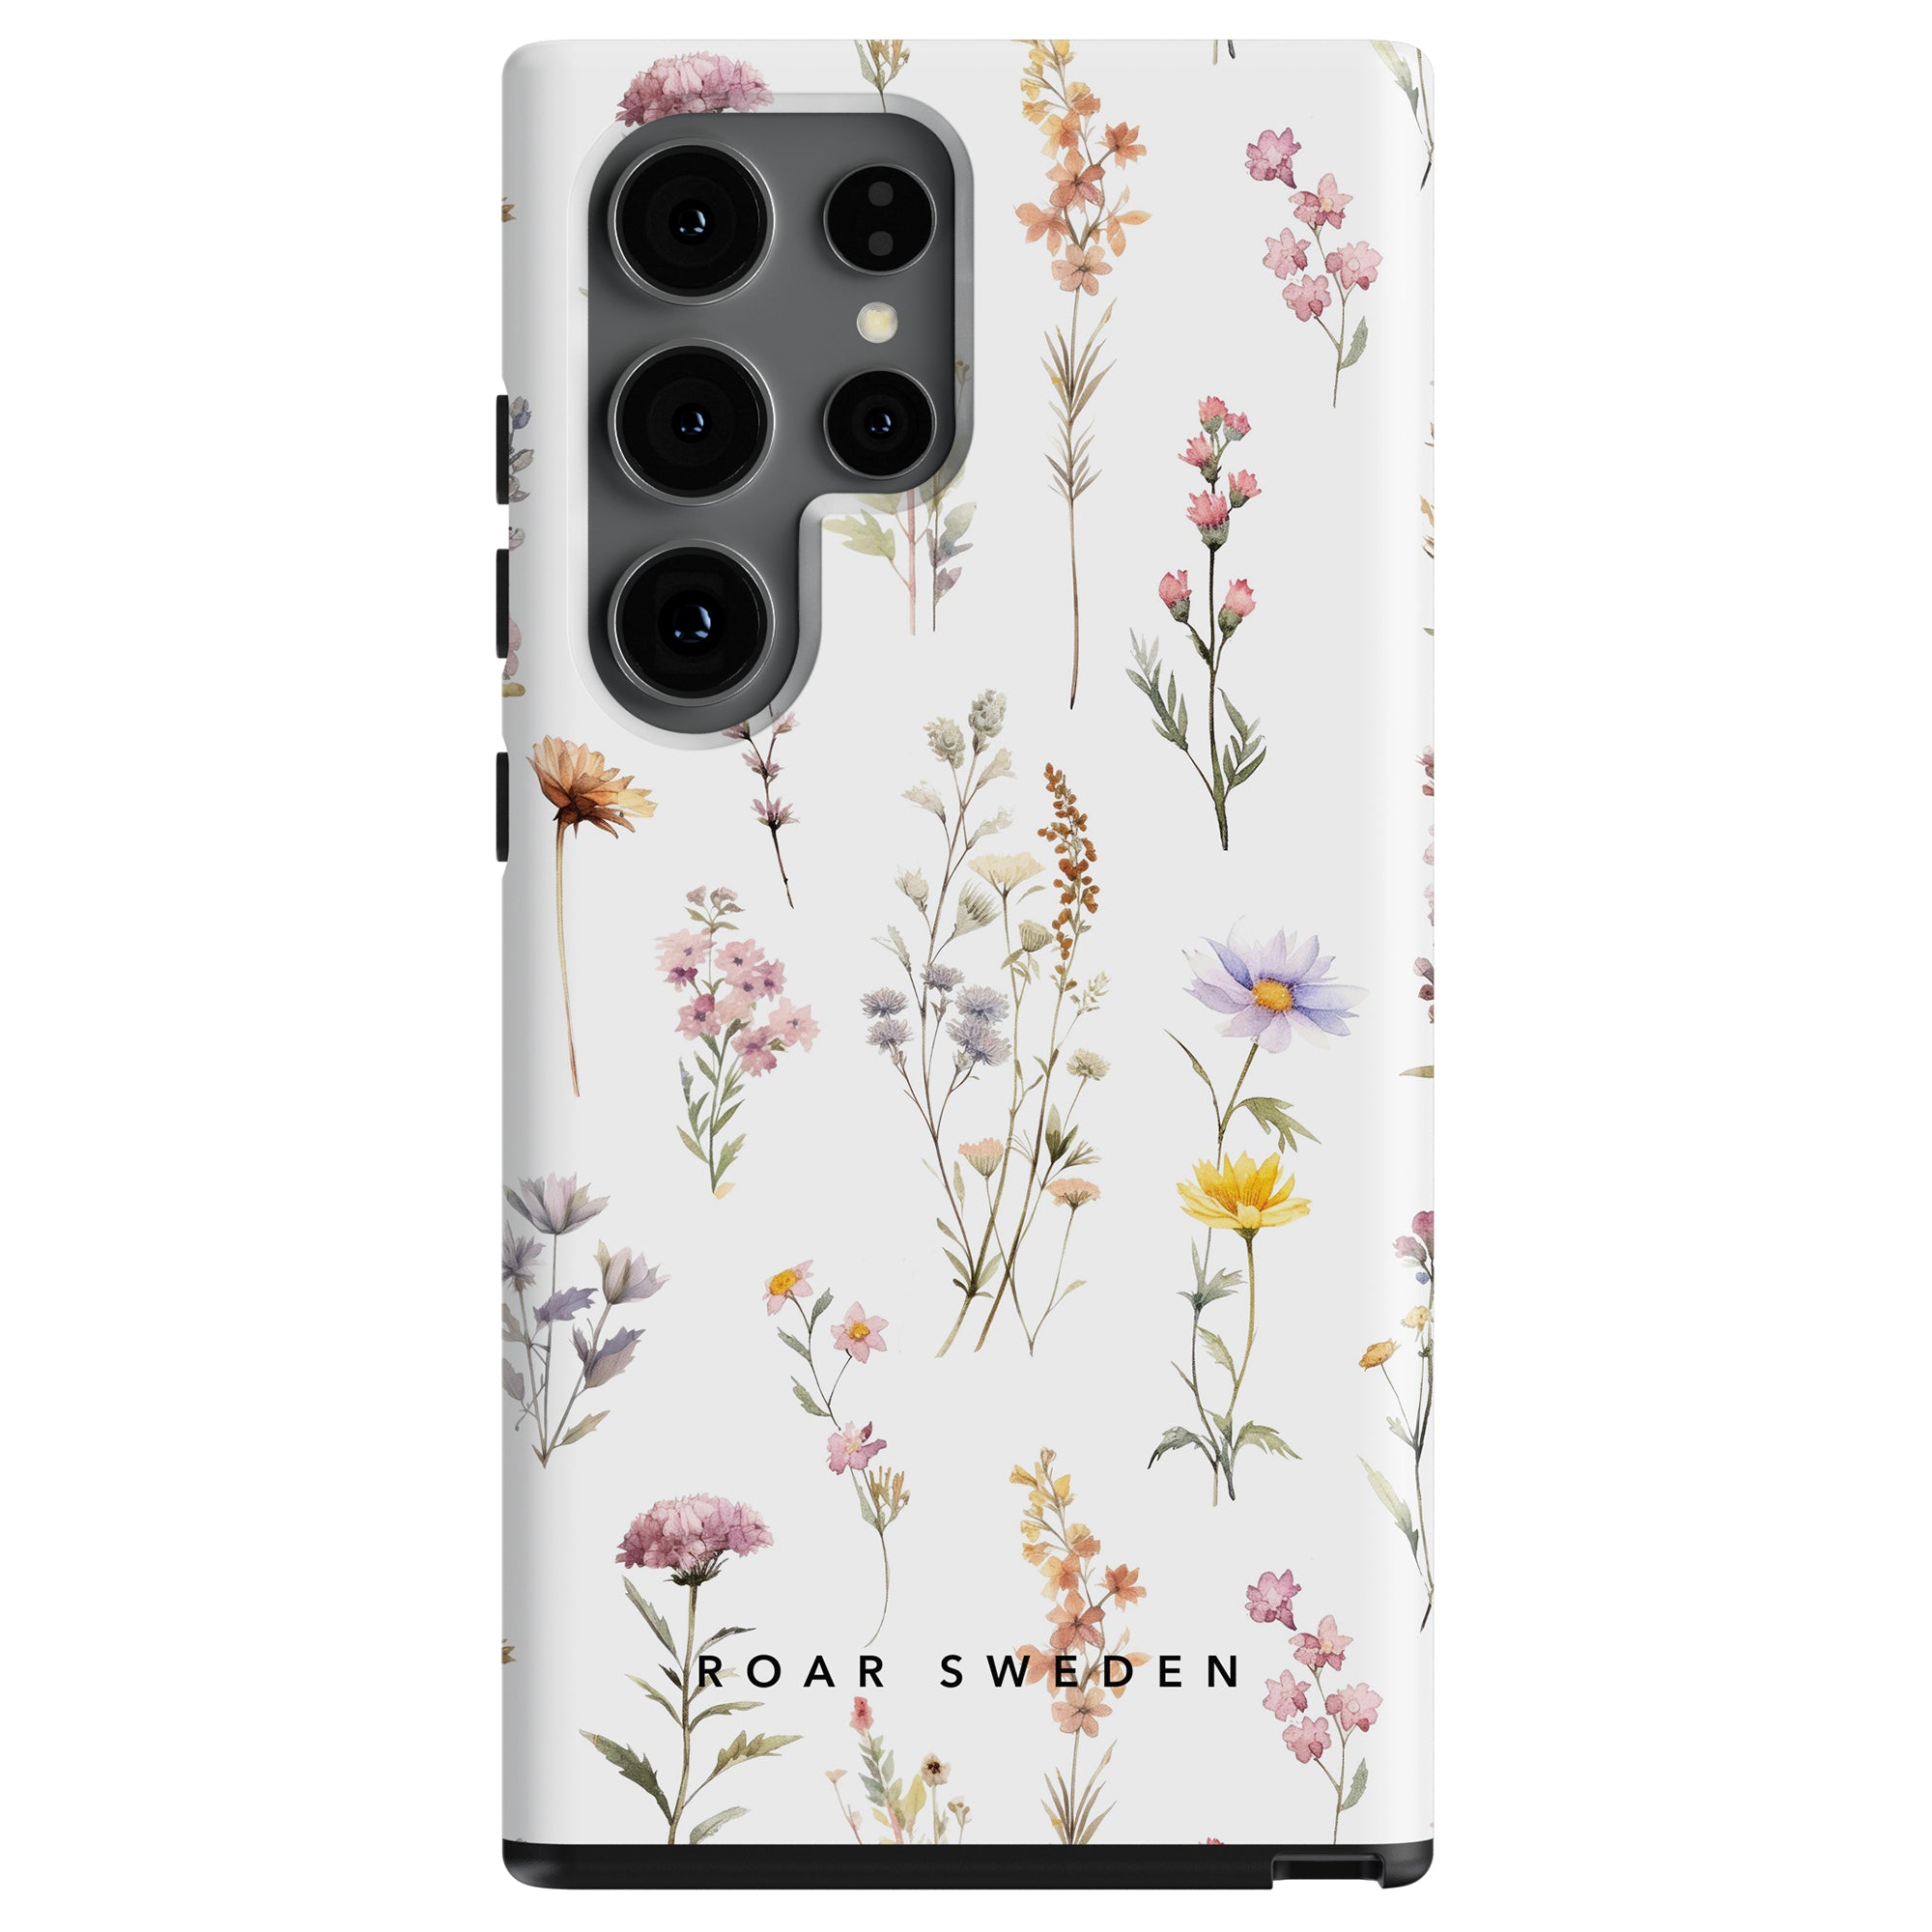 Smartphone with a Wild Flowers - Tough Case design.